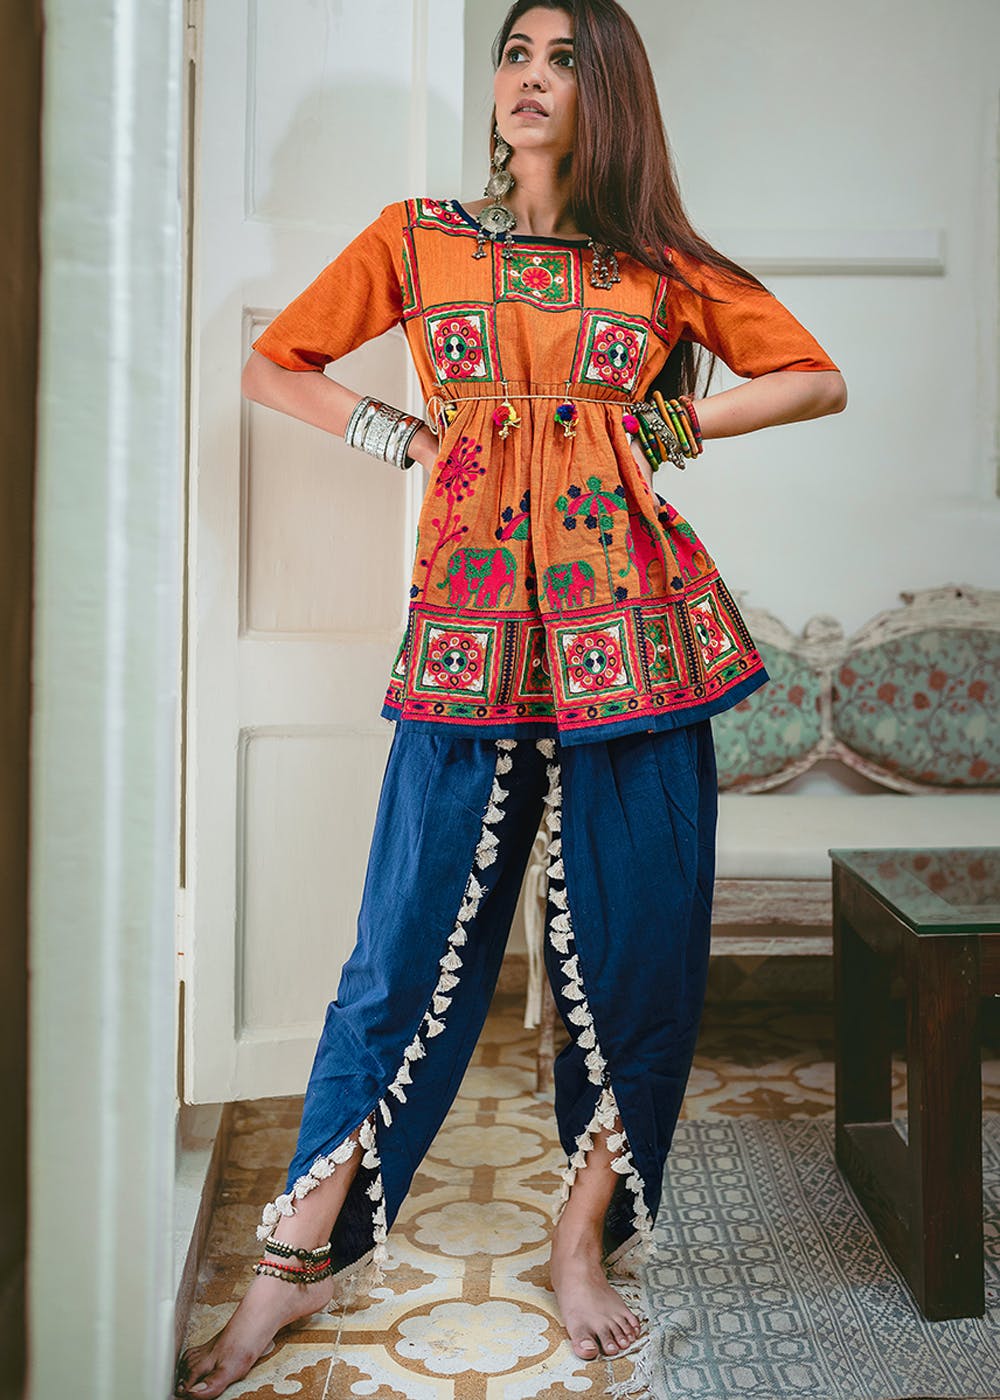 Chandheri flared kurti with overlapping gathered sleeves and tulip pan